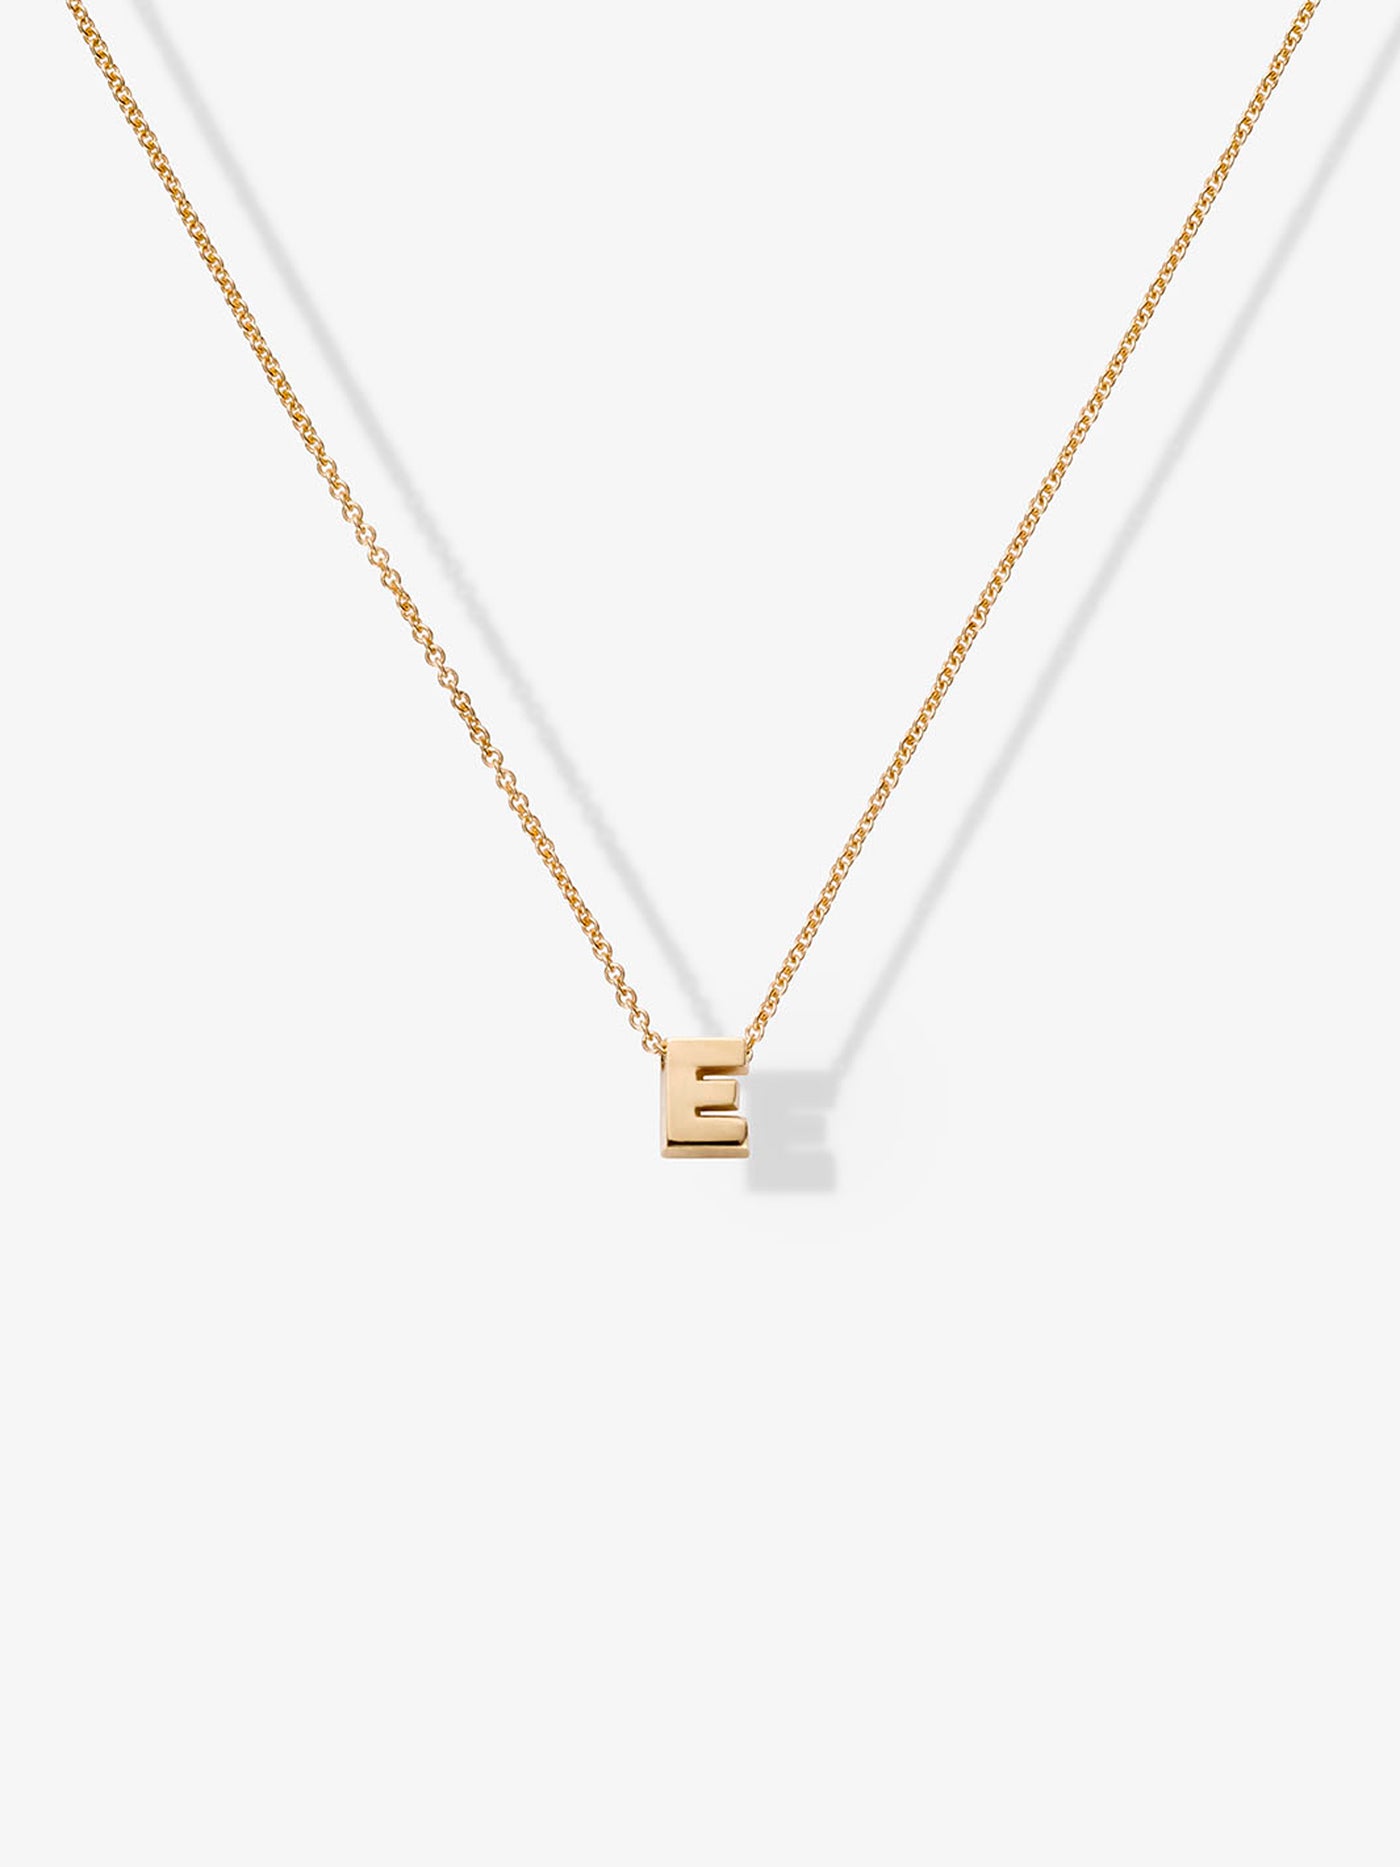 One Letter 18K Gold Necklace